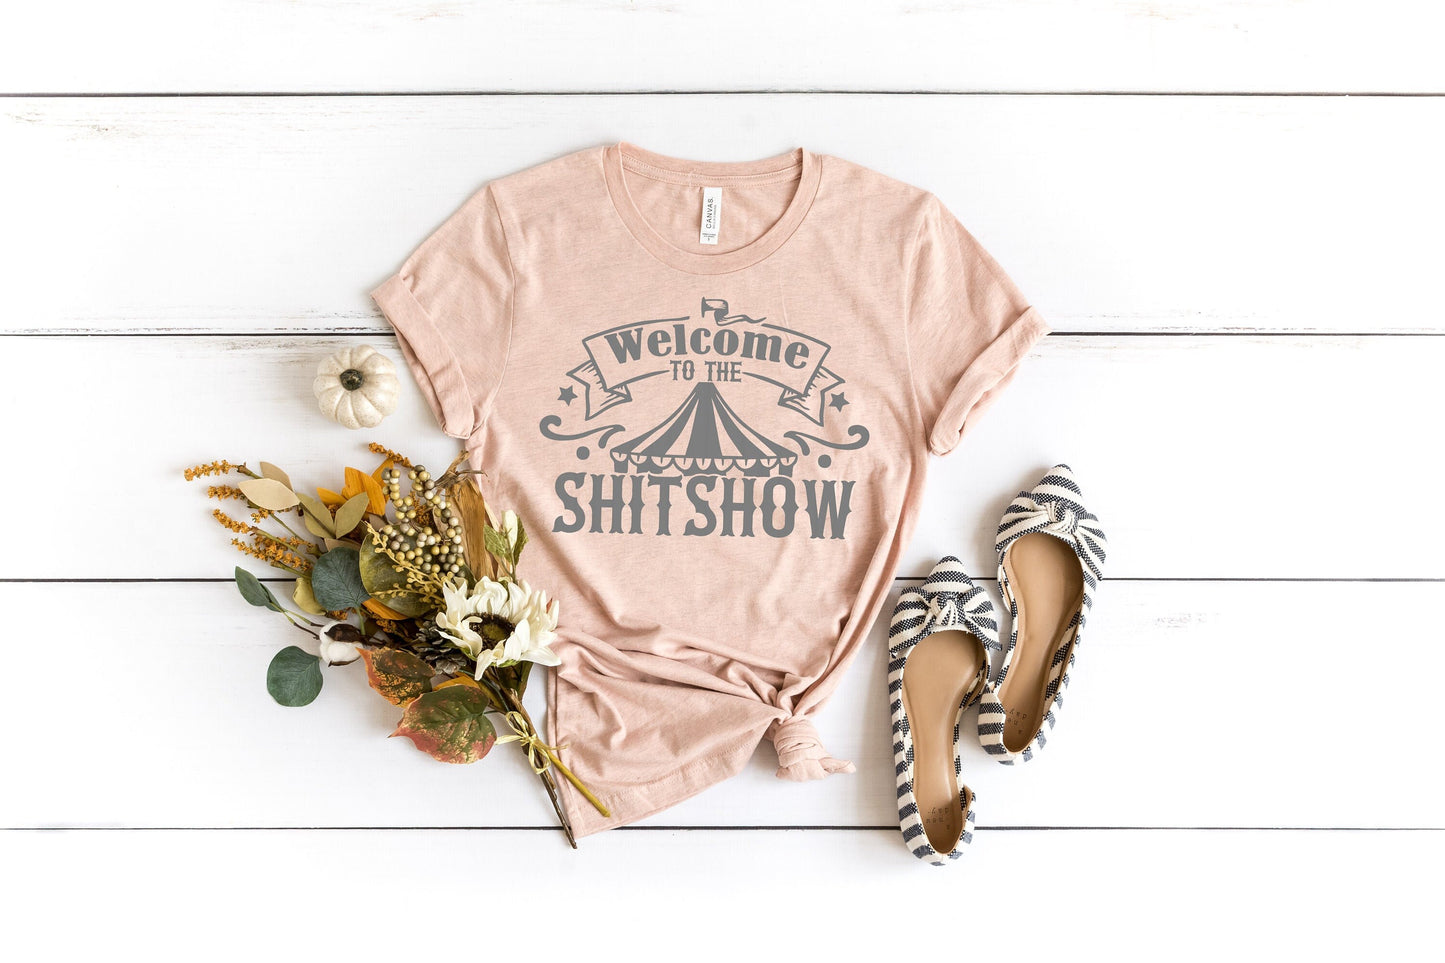 Welcome to the Shitshow unisex t-shirt - funny t-shirt - shirt for mom - shirt for dad - funny gifts - novelty t-shirt - offensive t-shirts